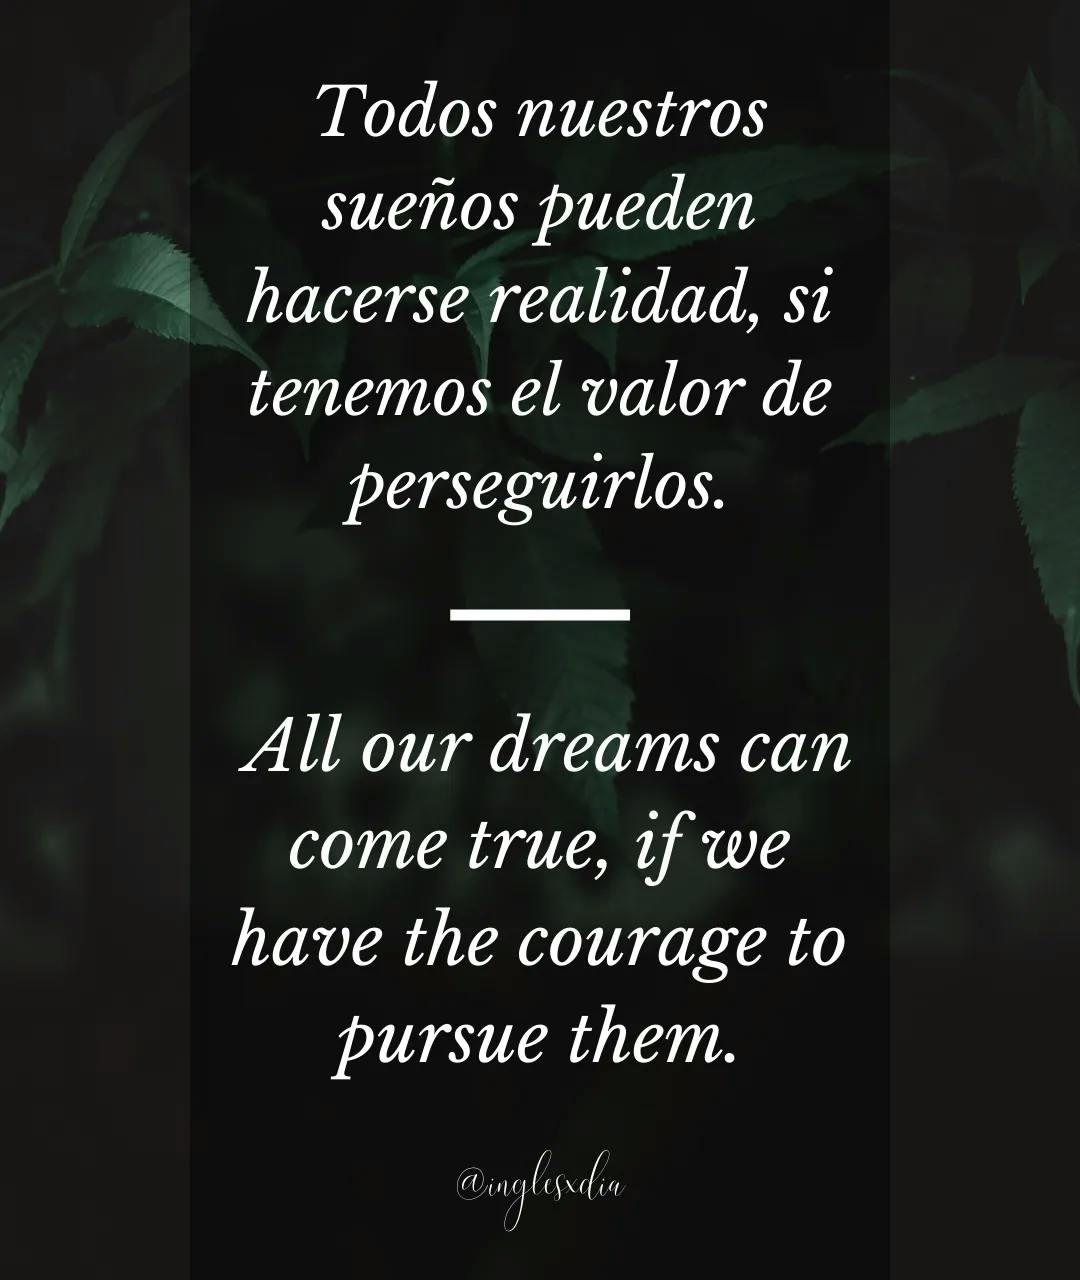 Frases motivadoras en inglés: All our dreams can come true, if we have the courage to pursue them.